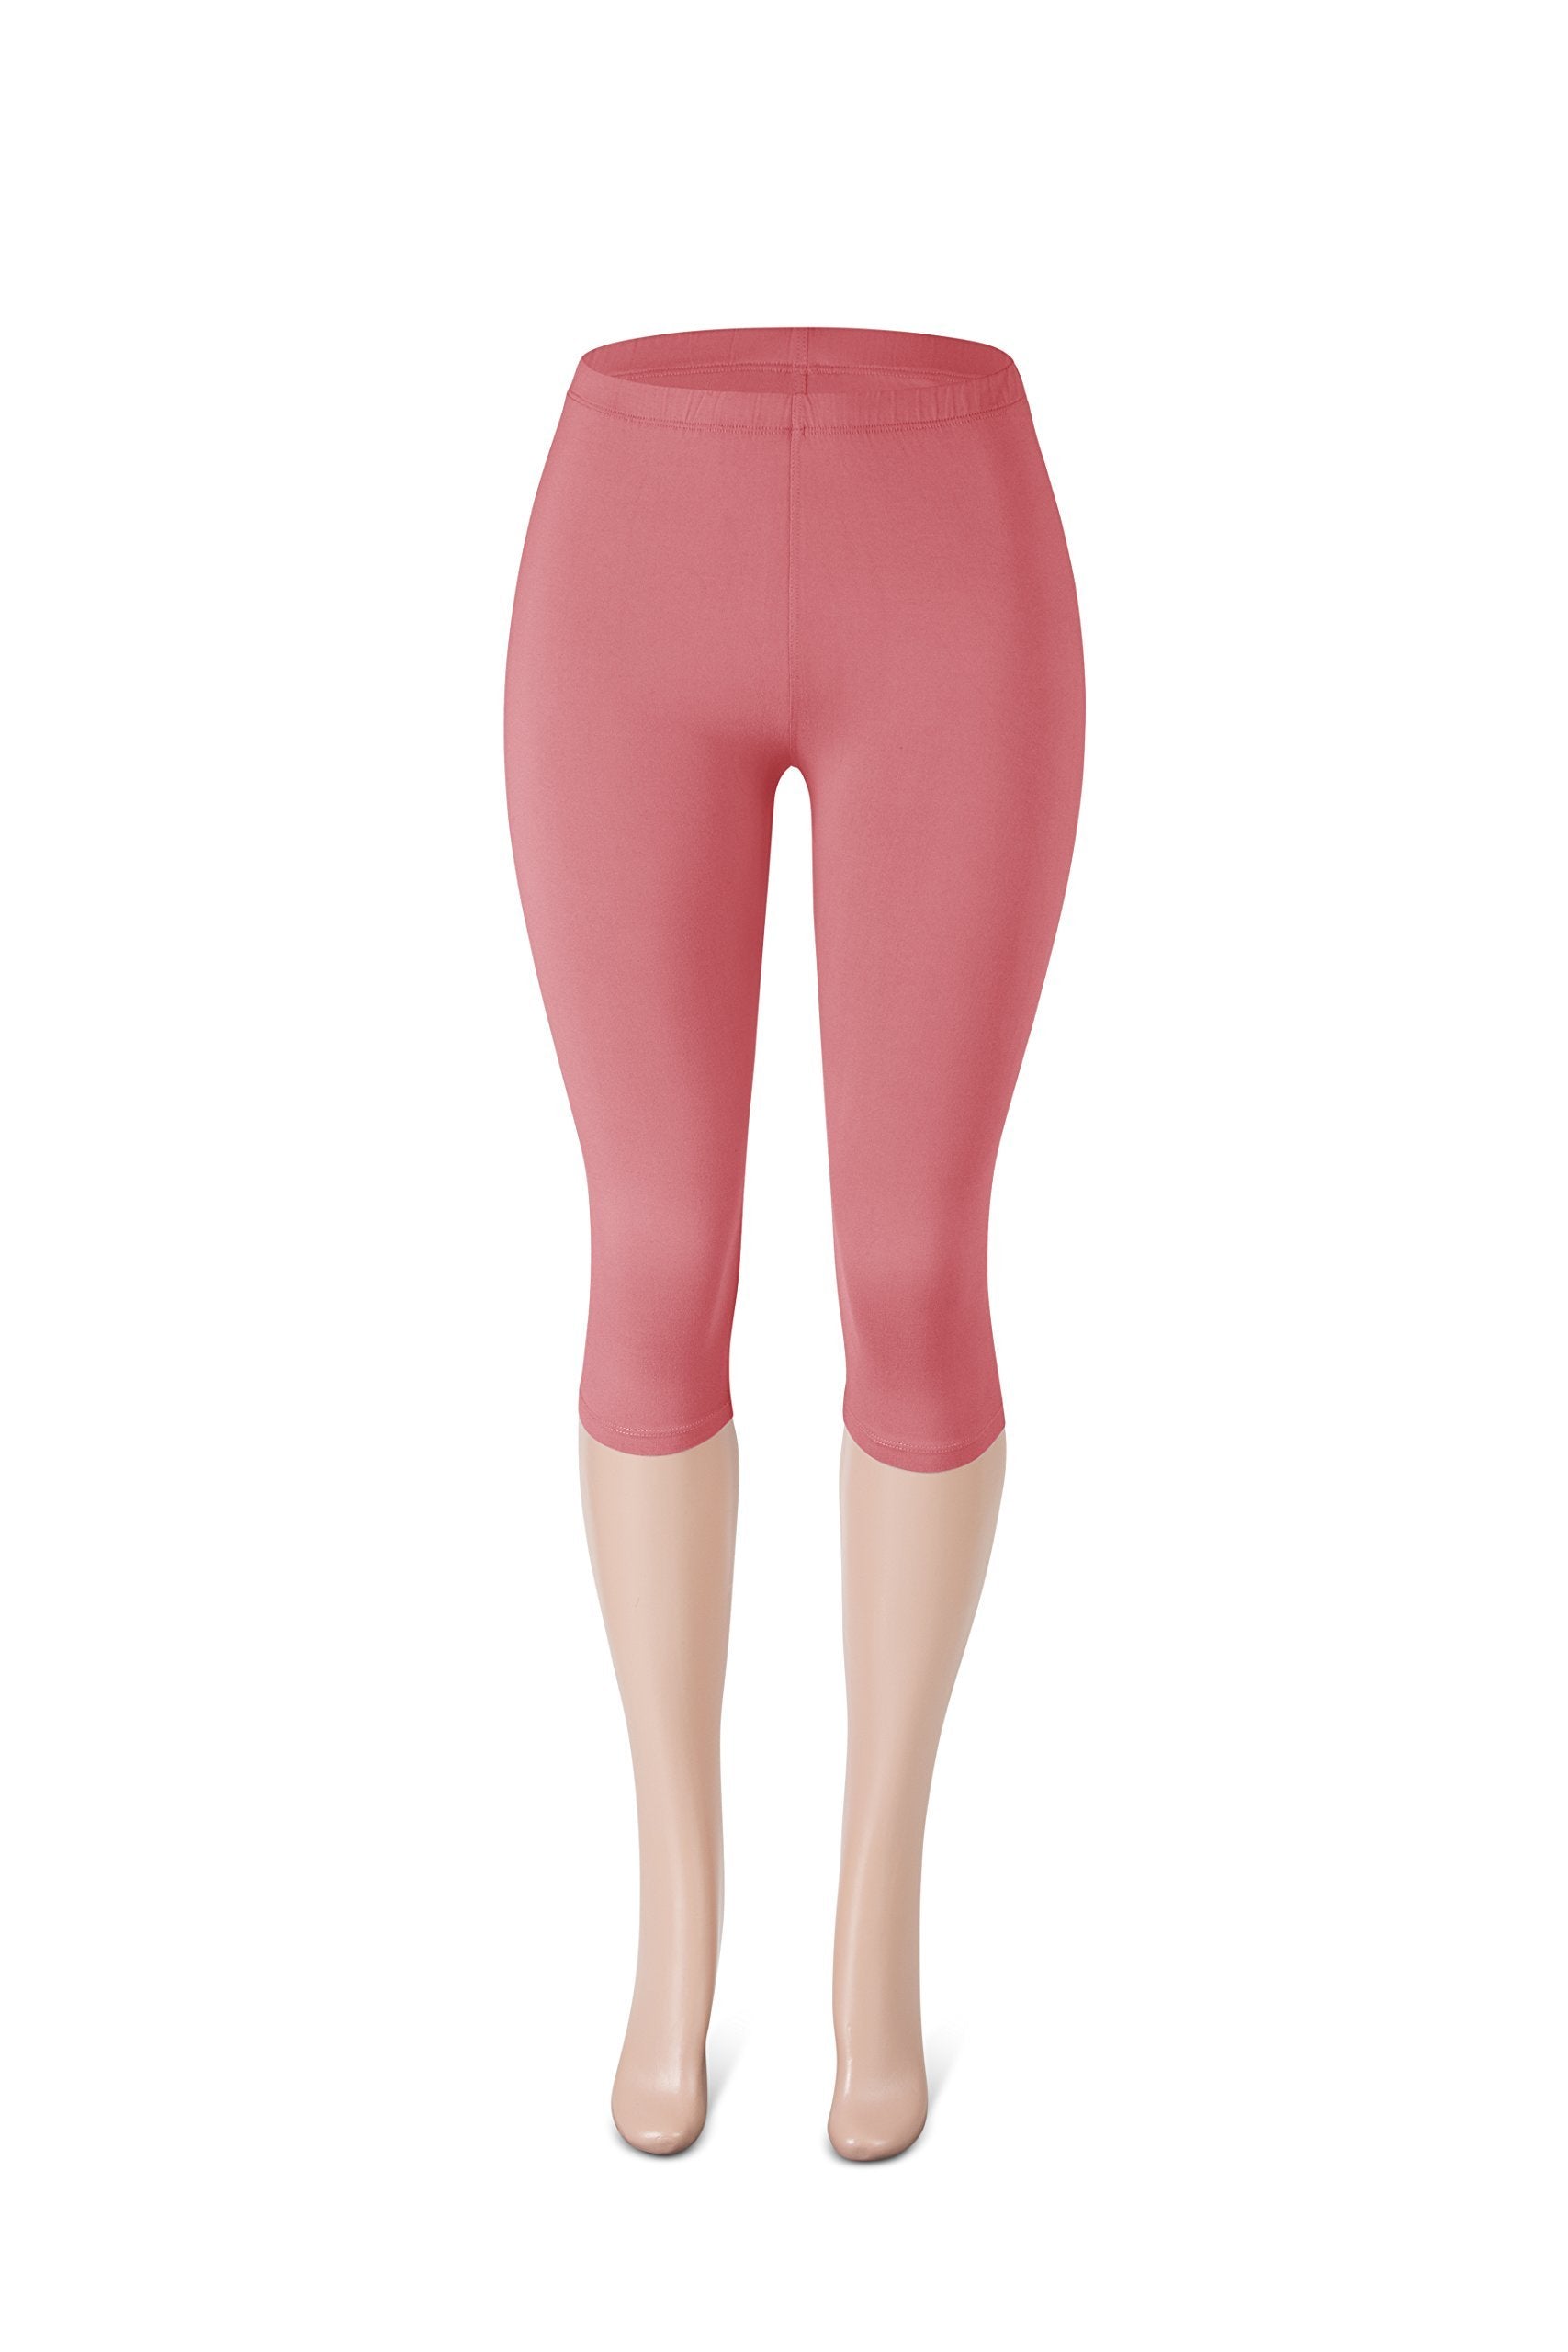 SATINA High Waisted Leggings for Women | Full Length | 1 Inch Waistband (One Size, Neon Coral)